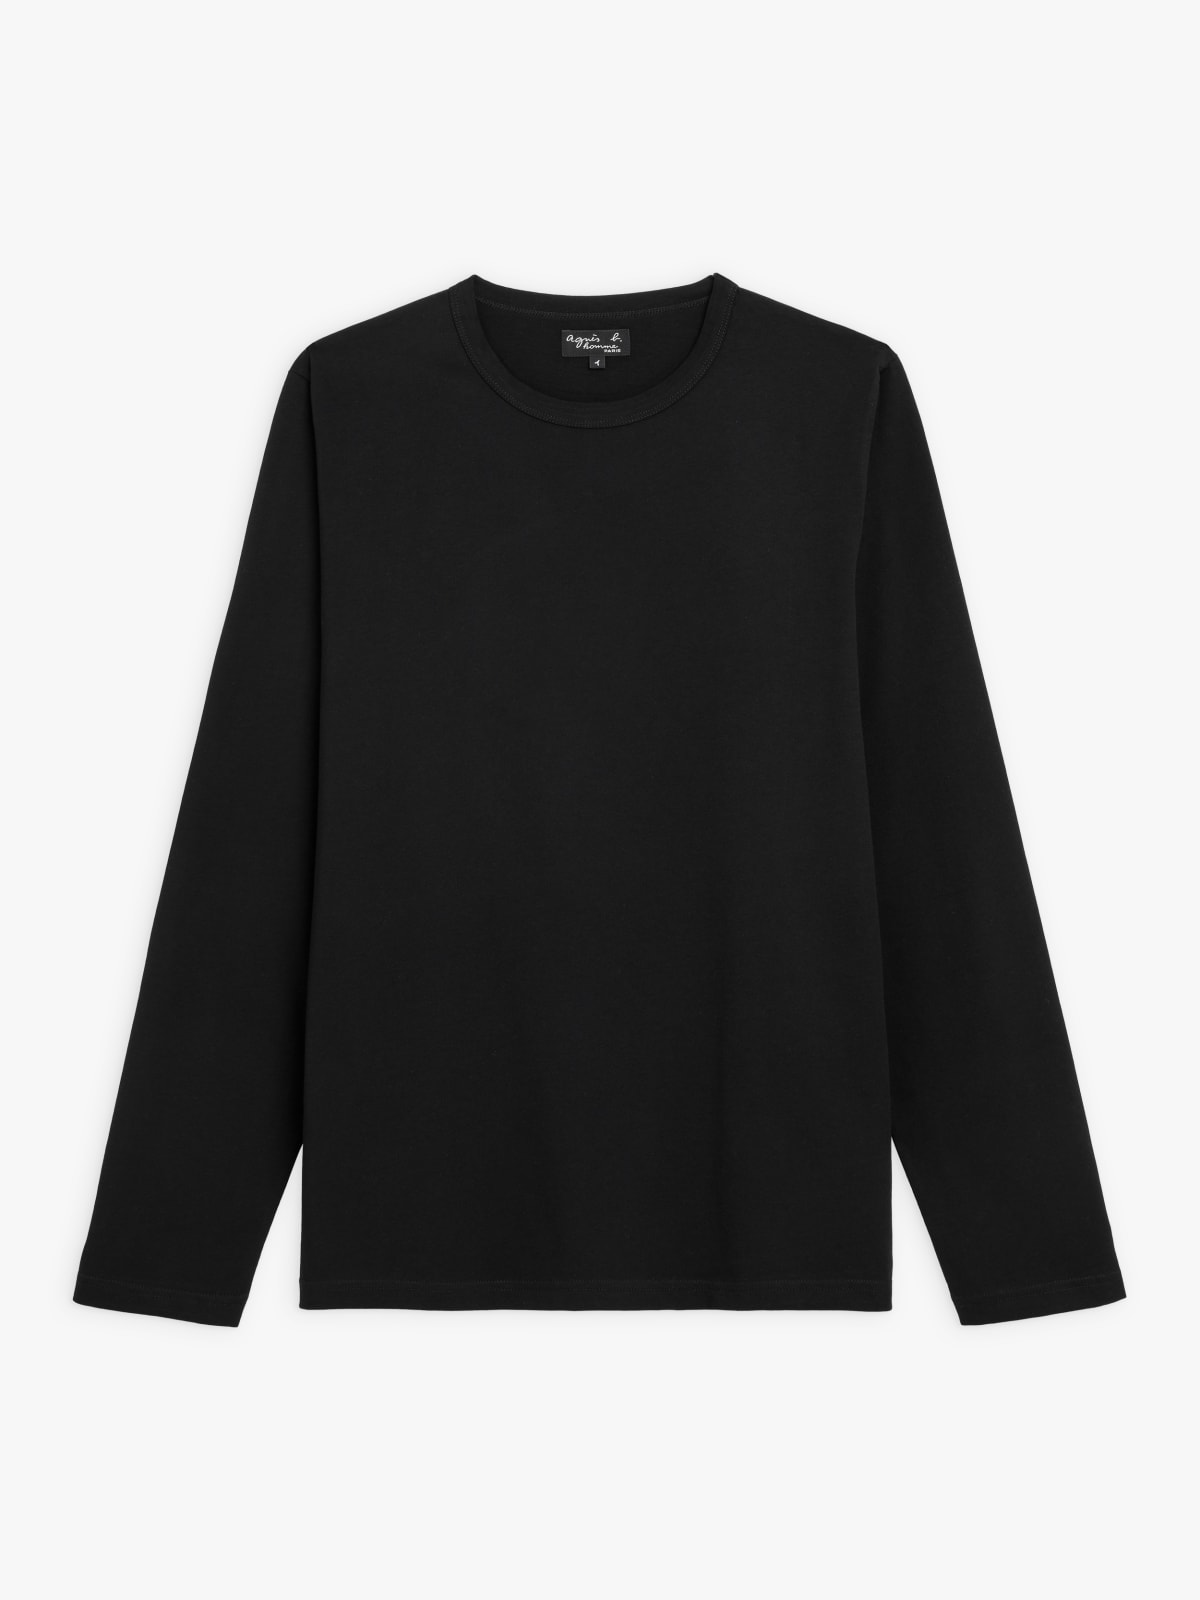 black long sleeves Coulos t-shirt